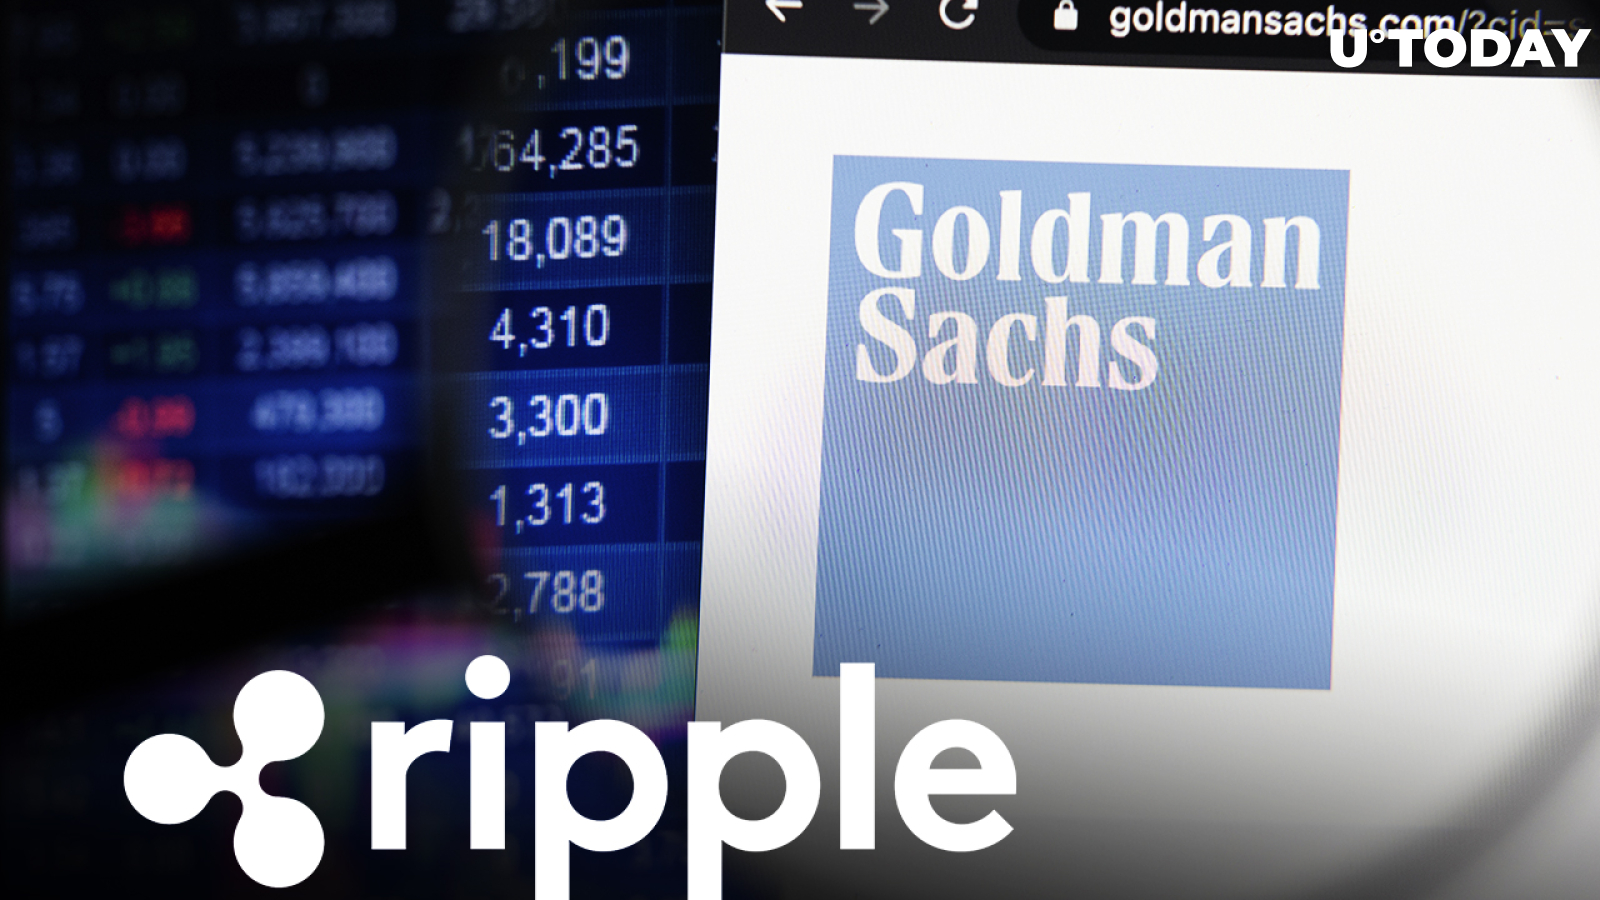 Ripple Identified as "Opportunity in Payments" Alongside Circle by Goldman Sachs